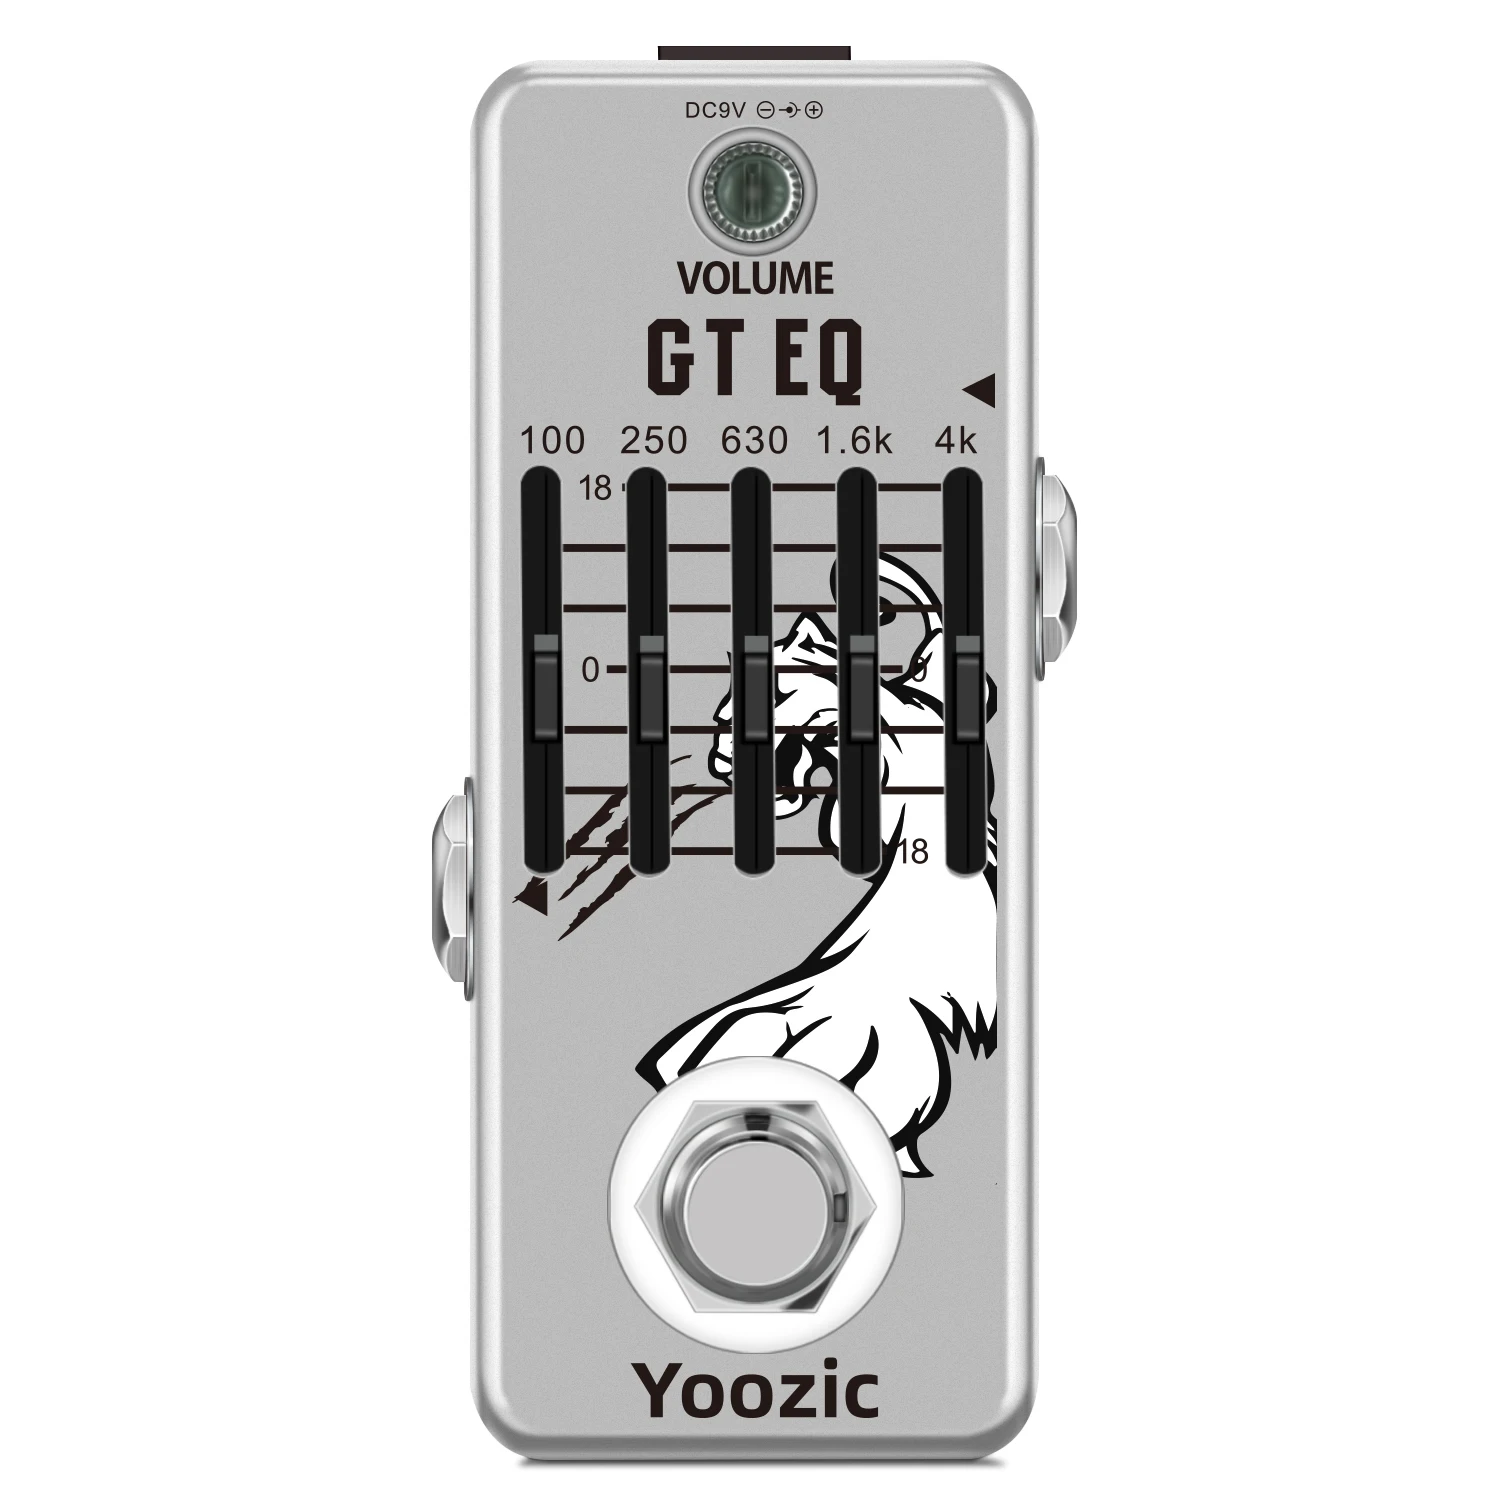 

Yoozic LEF-317A Guitar Equalizer Pedal 5-band Parametric EQ Guitar Effect Pedal Frequency Compensator ±18dB Range for Mini Size